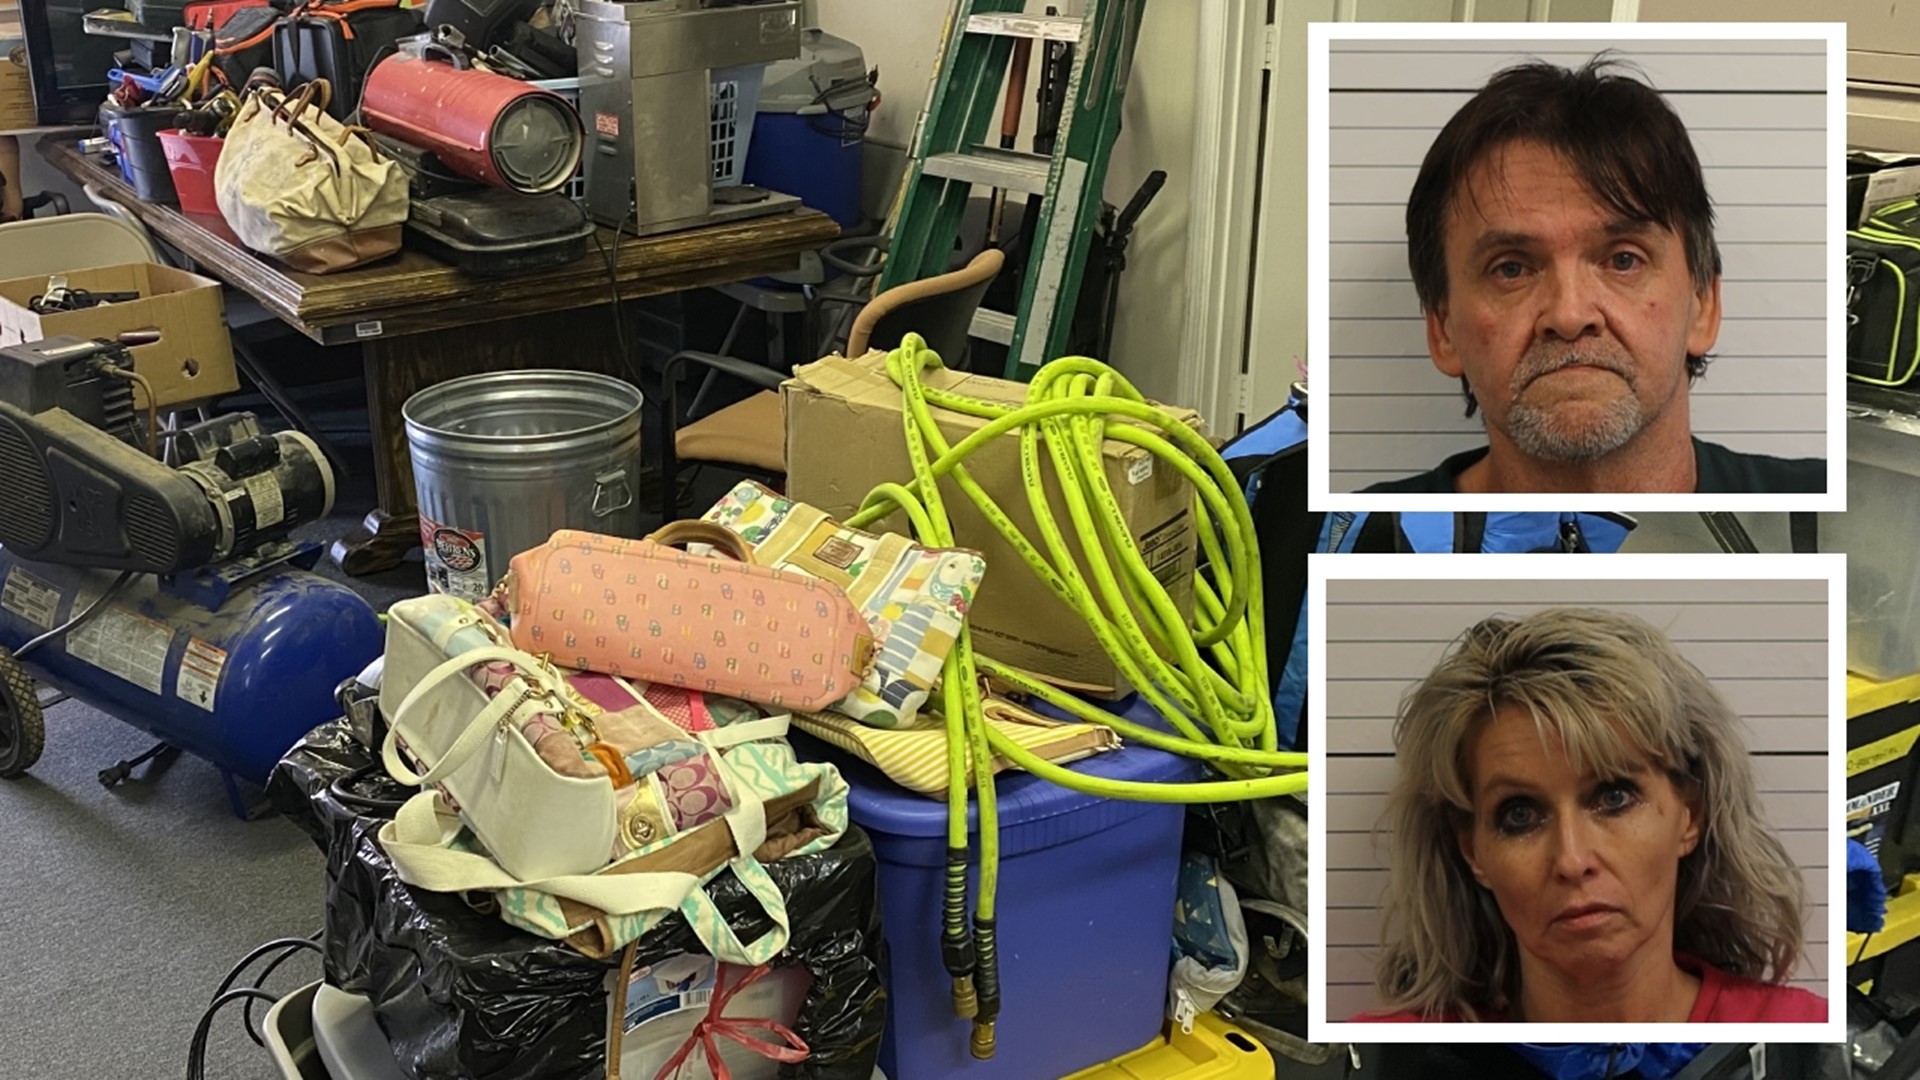 Deputies said the two admitted to breaking into storage units and stealing thousands of dollars worth of items, including tools and yard equipment.